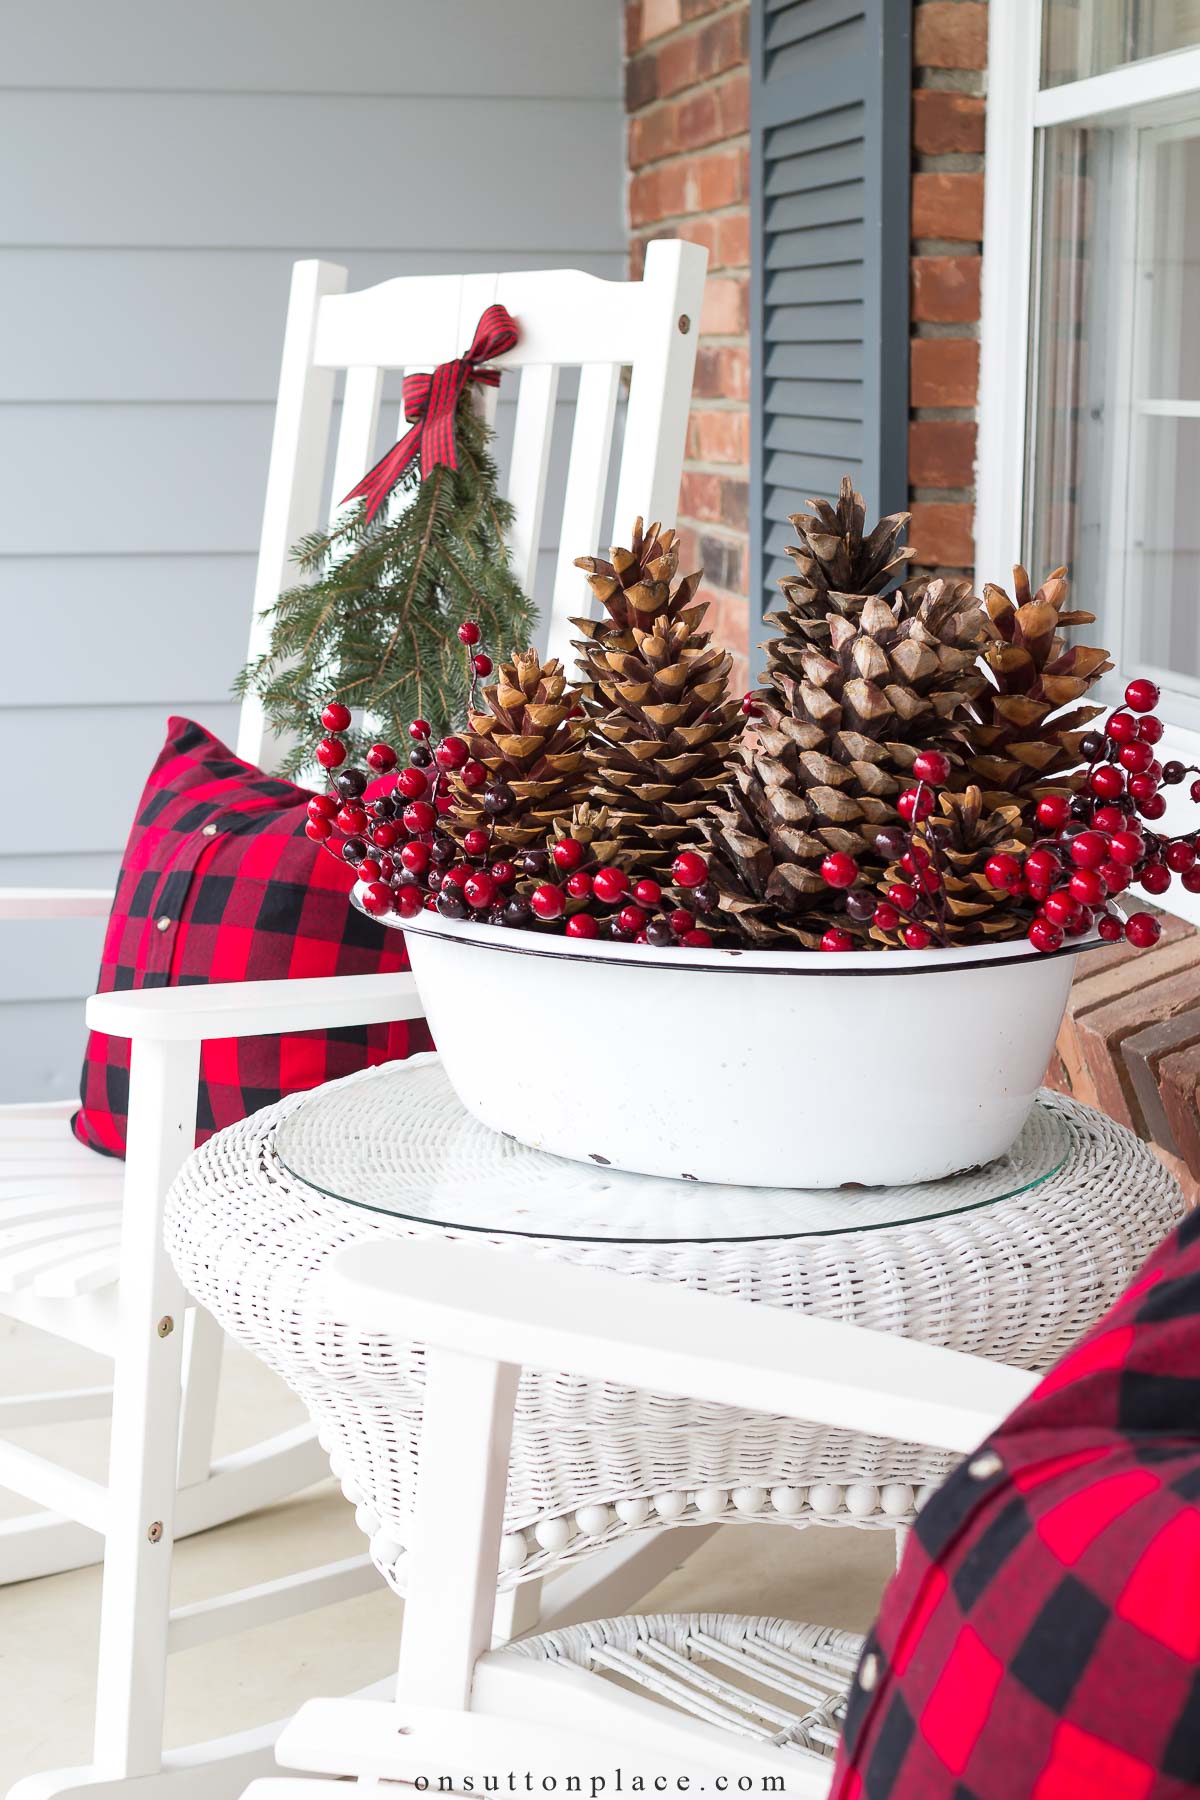 How to Get Inspired with Buffalo Plaid and Decorate your Home Creatively